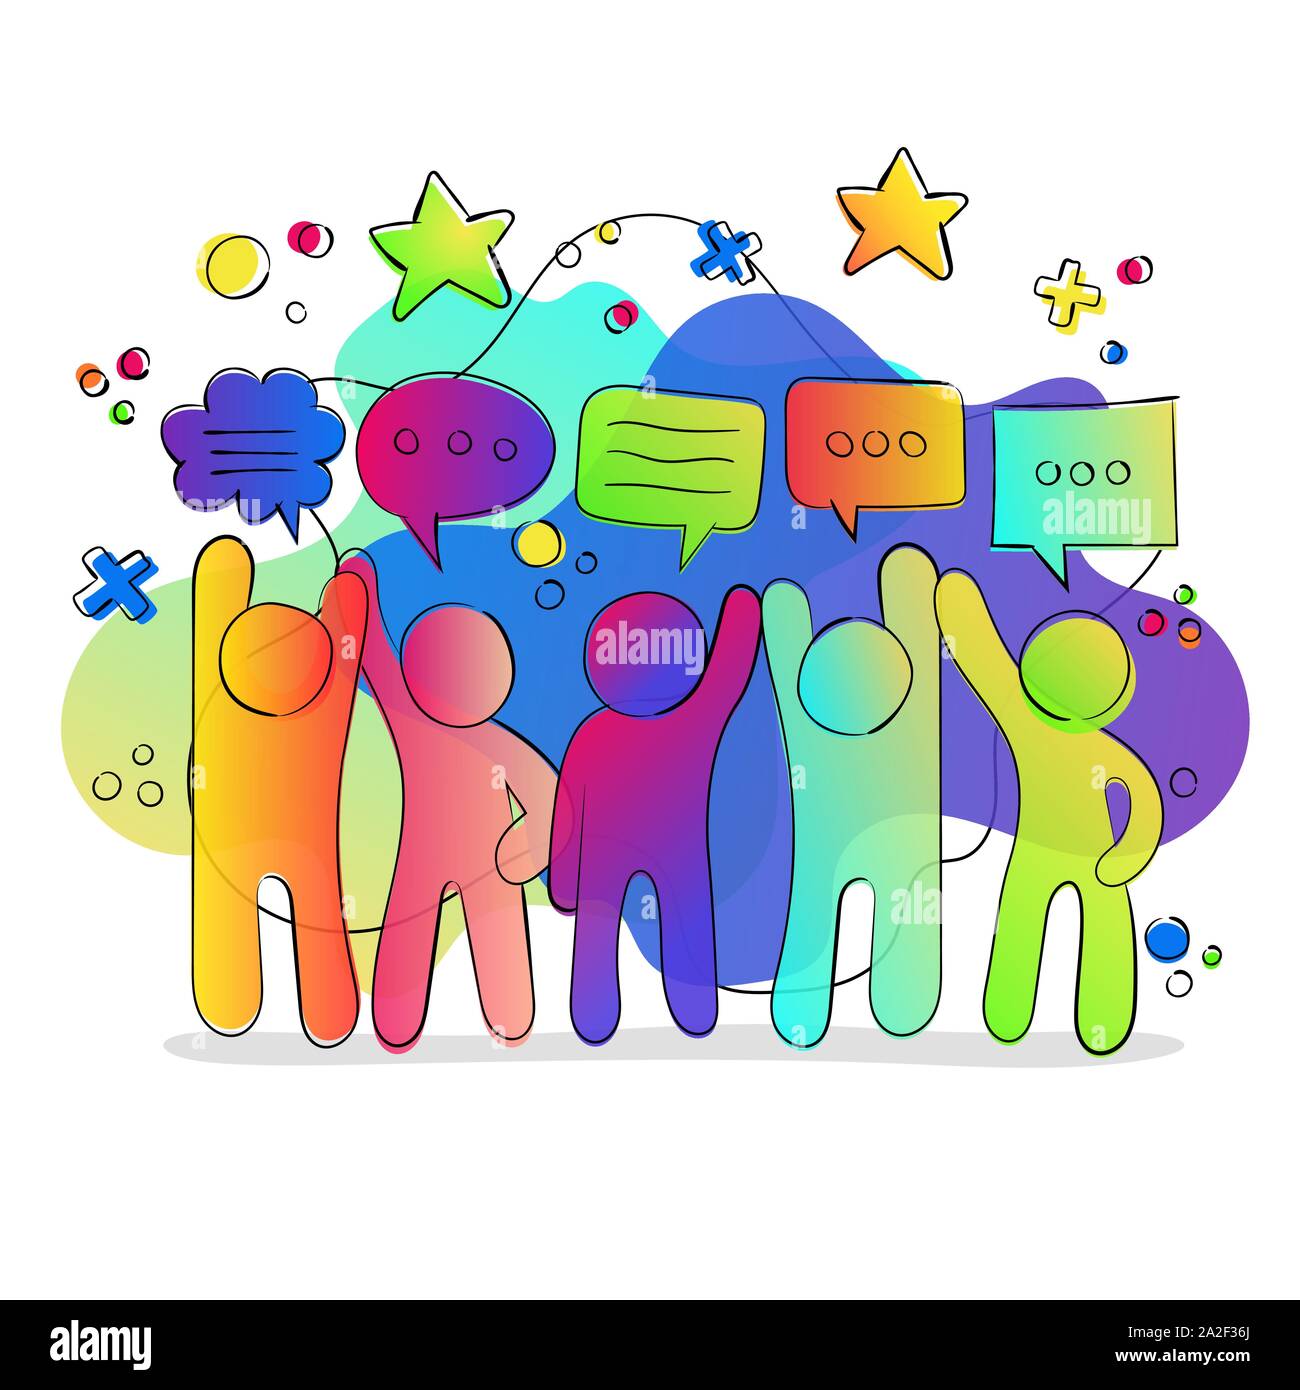 Social communication concept of colorful gradient friend group with online network icons and chat bubbles. Stock Vector